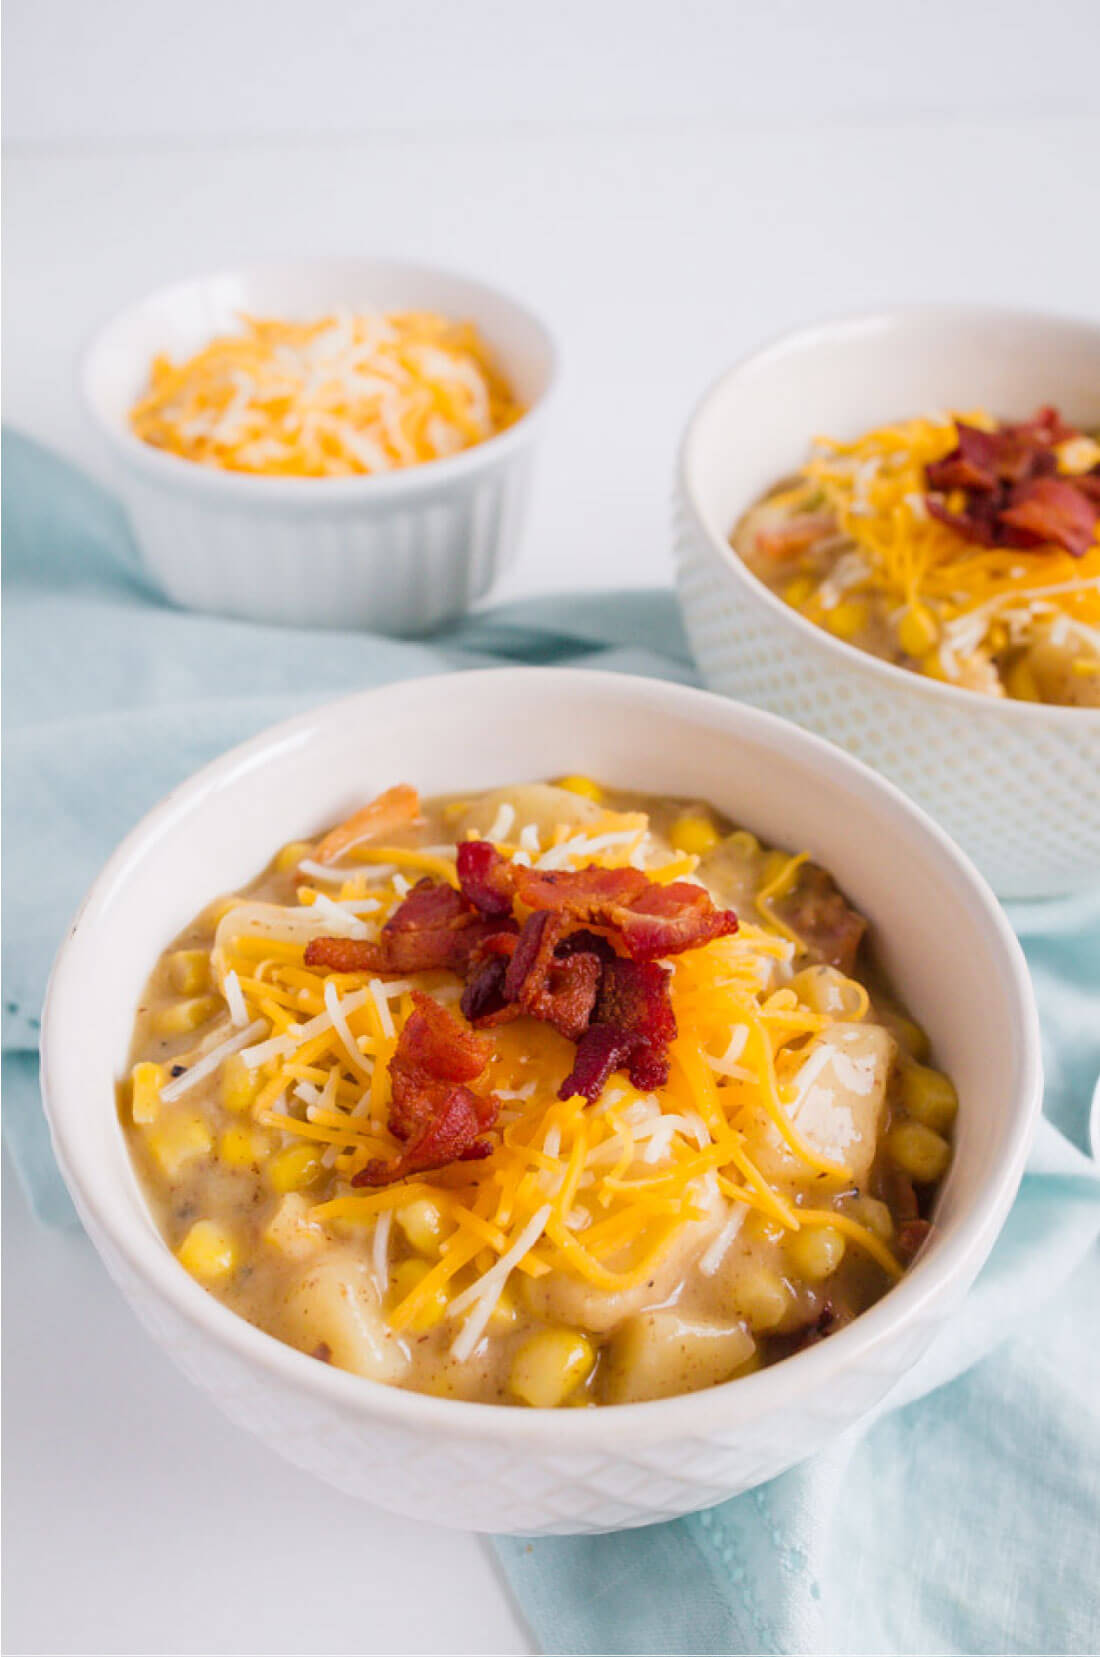 Slow Cooker Corn Chowder - the perfect thing to make in the fall to warm you up. So good and easy to make! www.thirtyhandmadedays.com